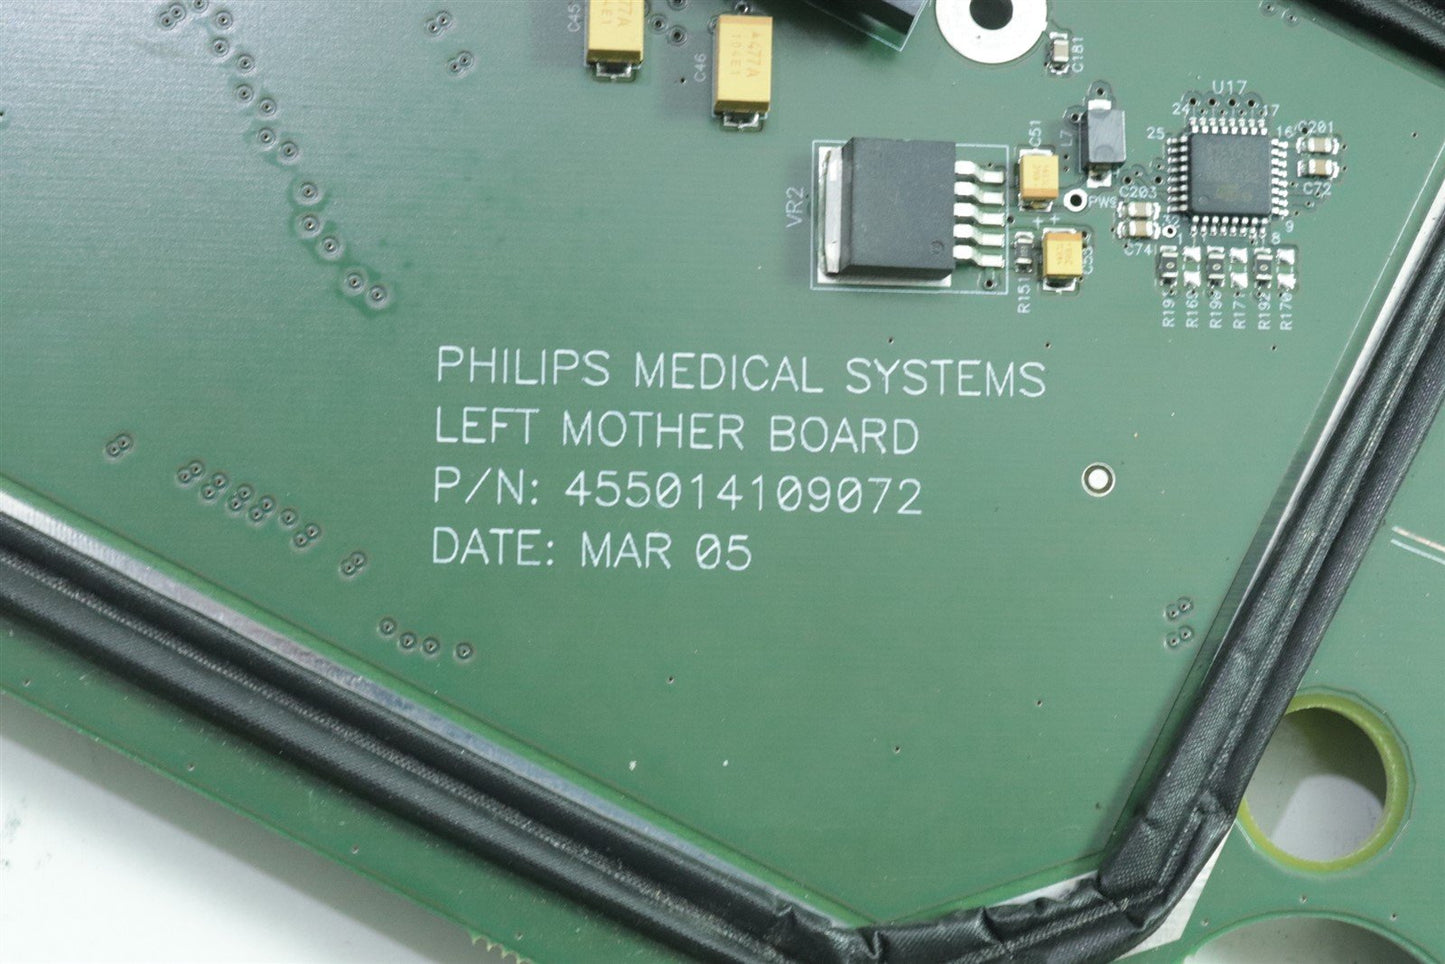 Philips CT Brilliance 64 Left Mother Board 455014109072